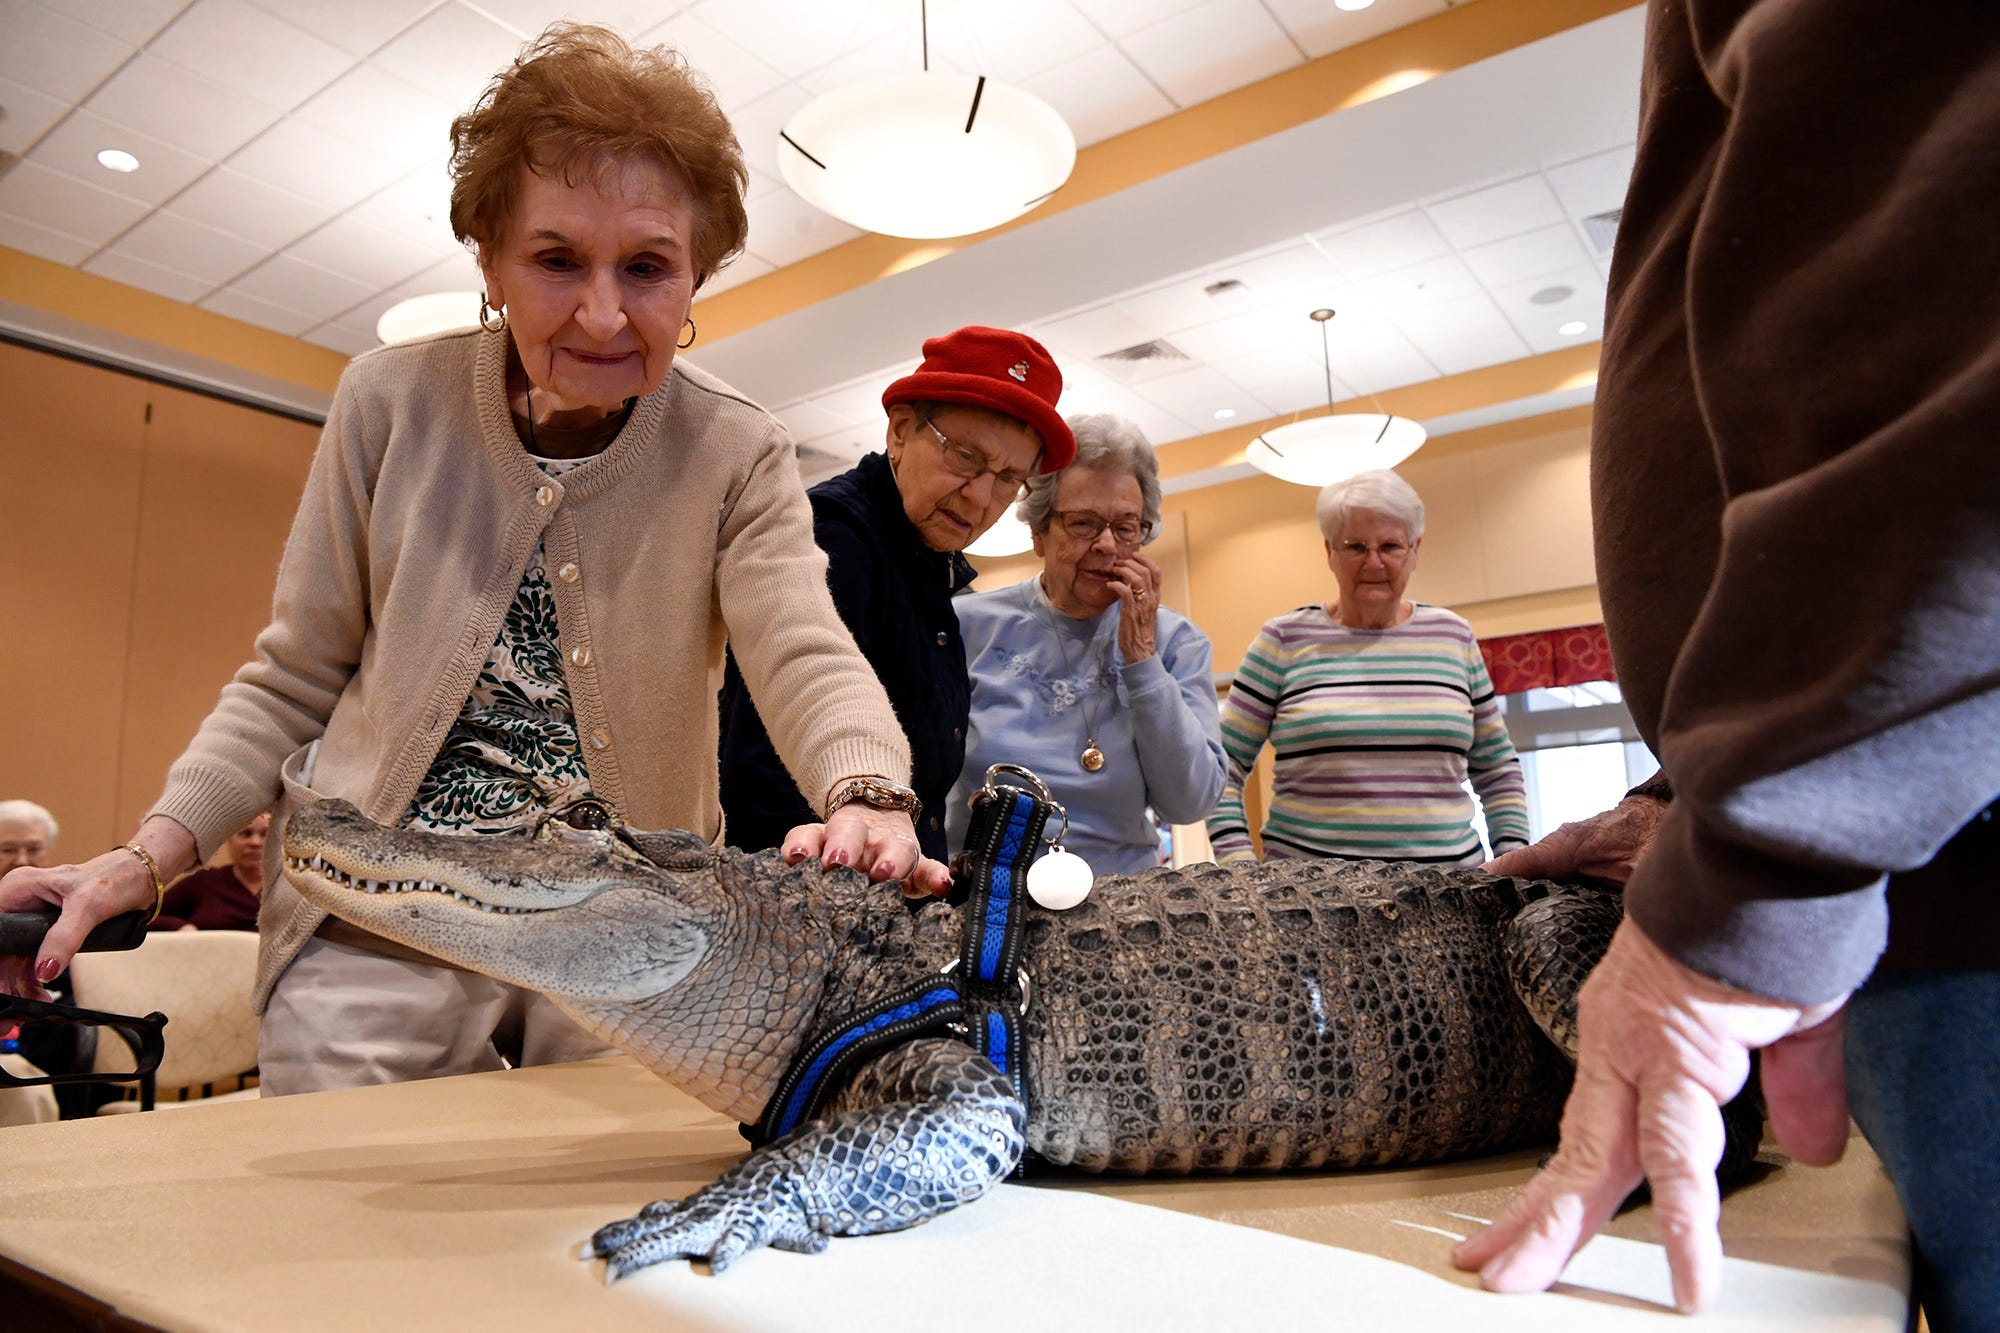 Gloria Waston, 90 left, Blanche Hake, 84, and Alice Brown, 80, visit with Wally the alligator at SpiriTrust Lutheran's Village at Sprenkle Drive, Monday, January 14, 2019.  
John A. Pavoncello photo